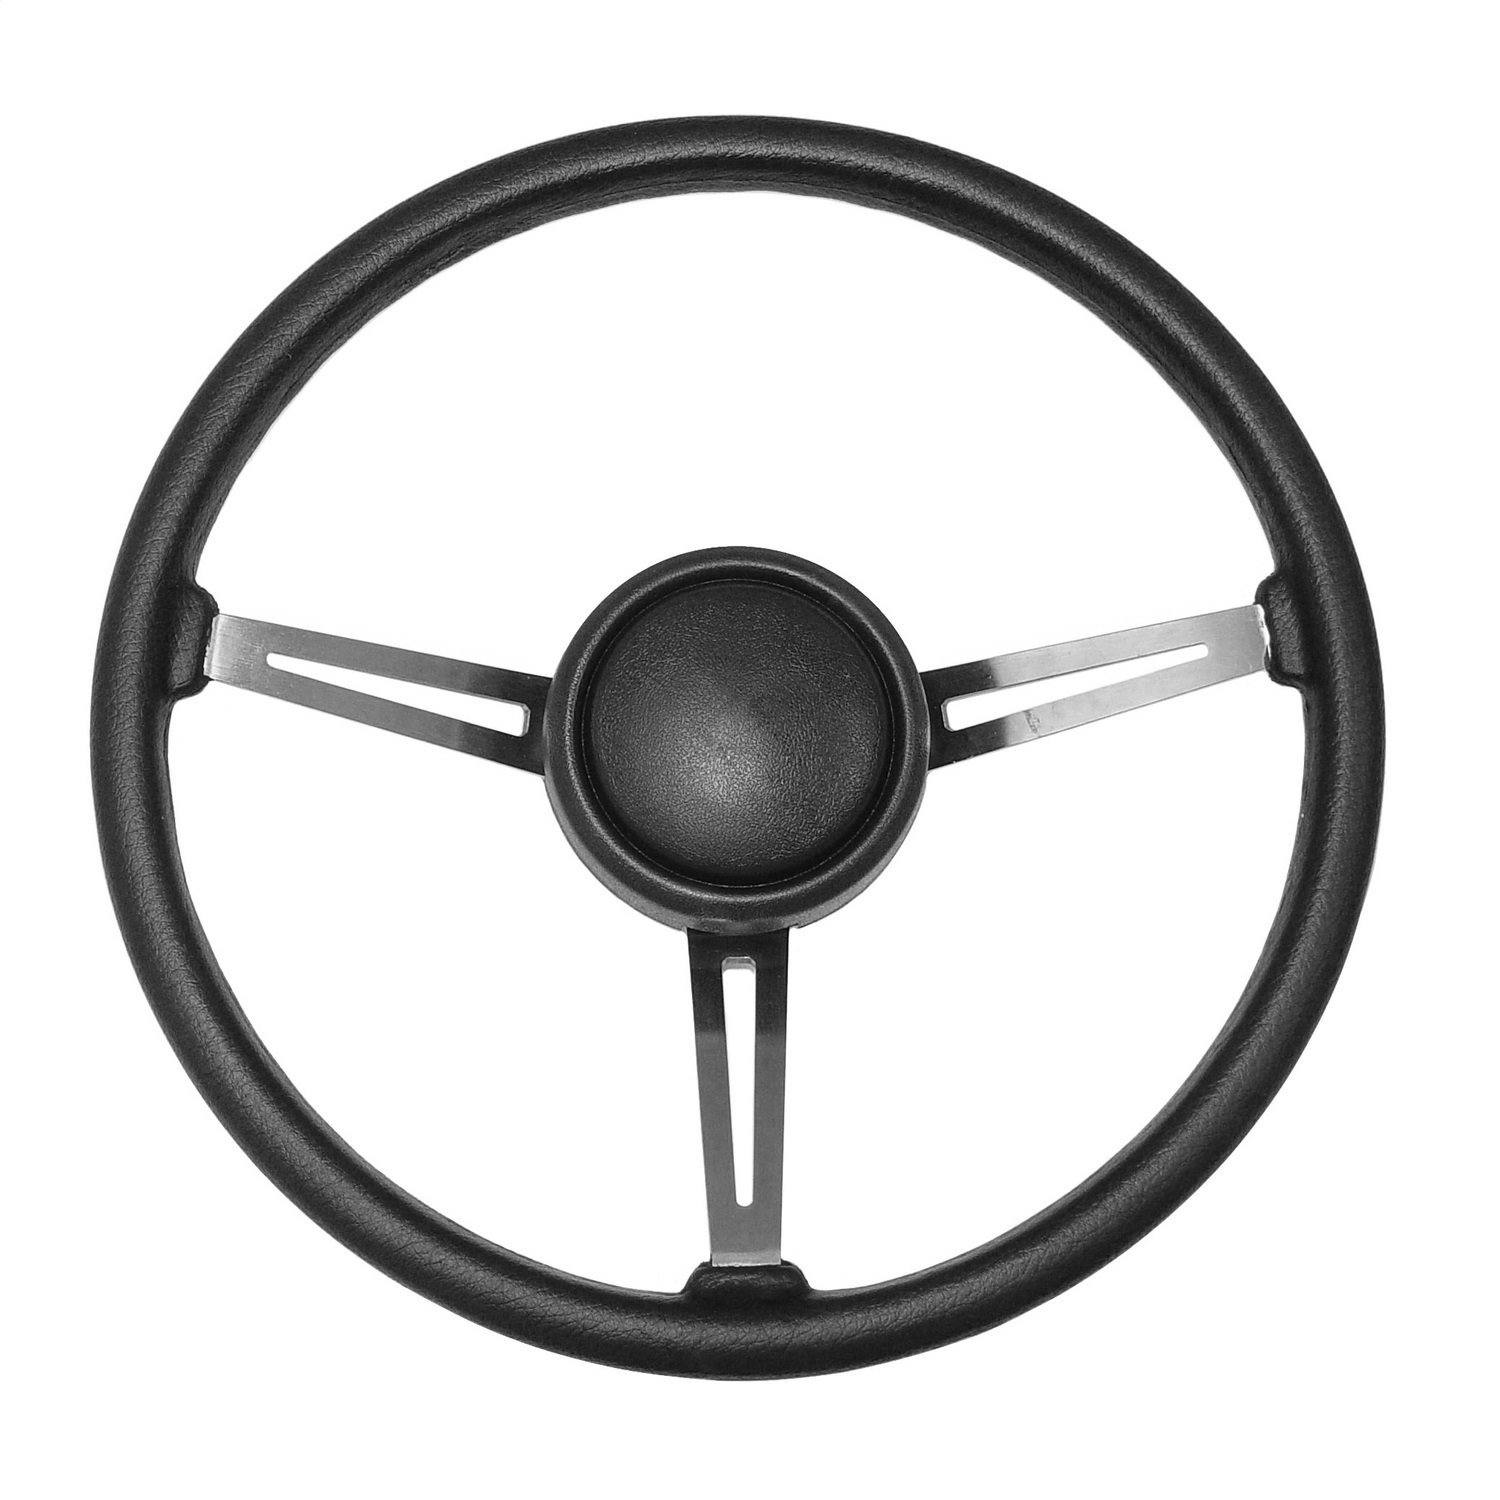 This black vinyl steering wheel kit from Omix-ADA fits 76-95 Jeep CJs & Wranglers. Includes the steering wheel and horn button.